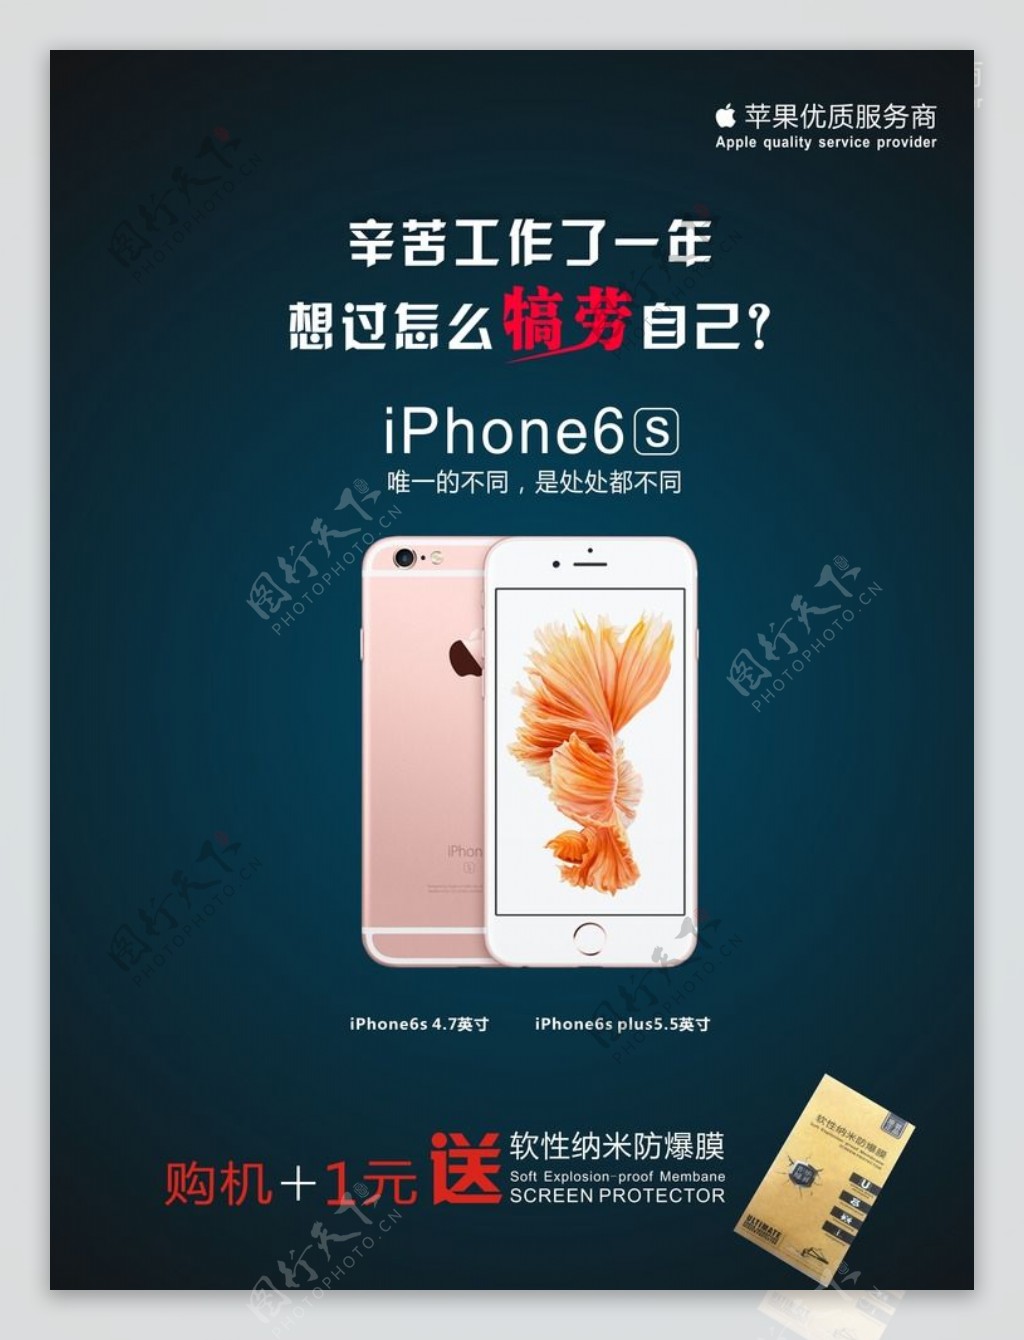 iPhone6s促销活动海报